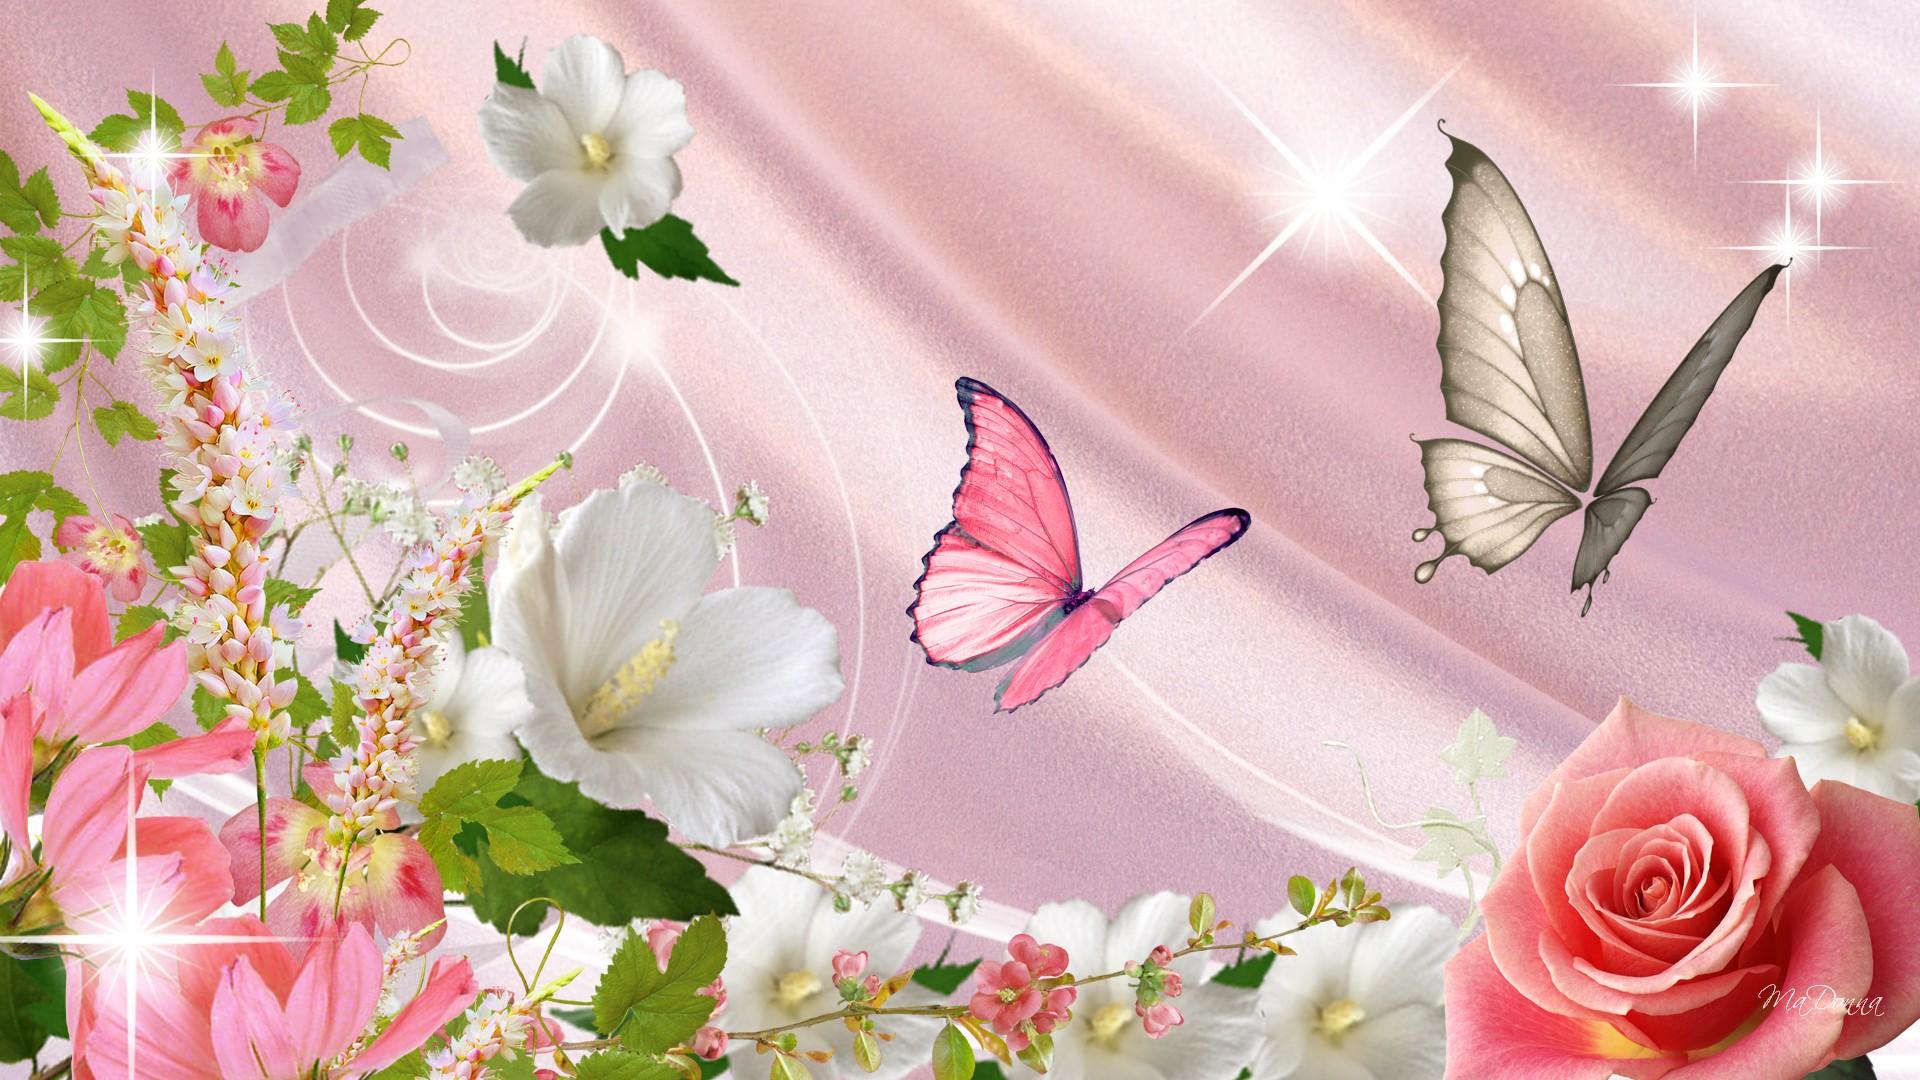 Spring Flowers And Buttterflies Cover Pictures to